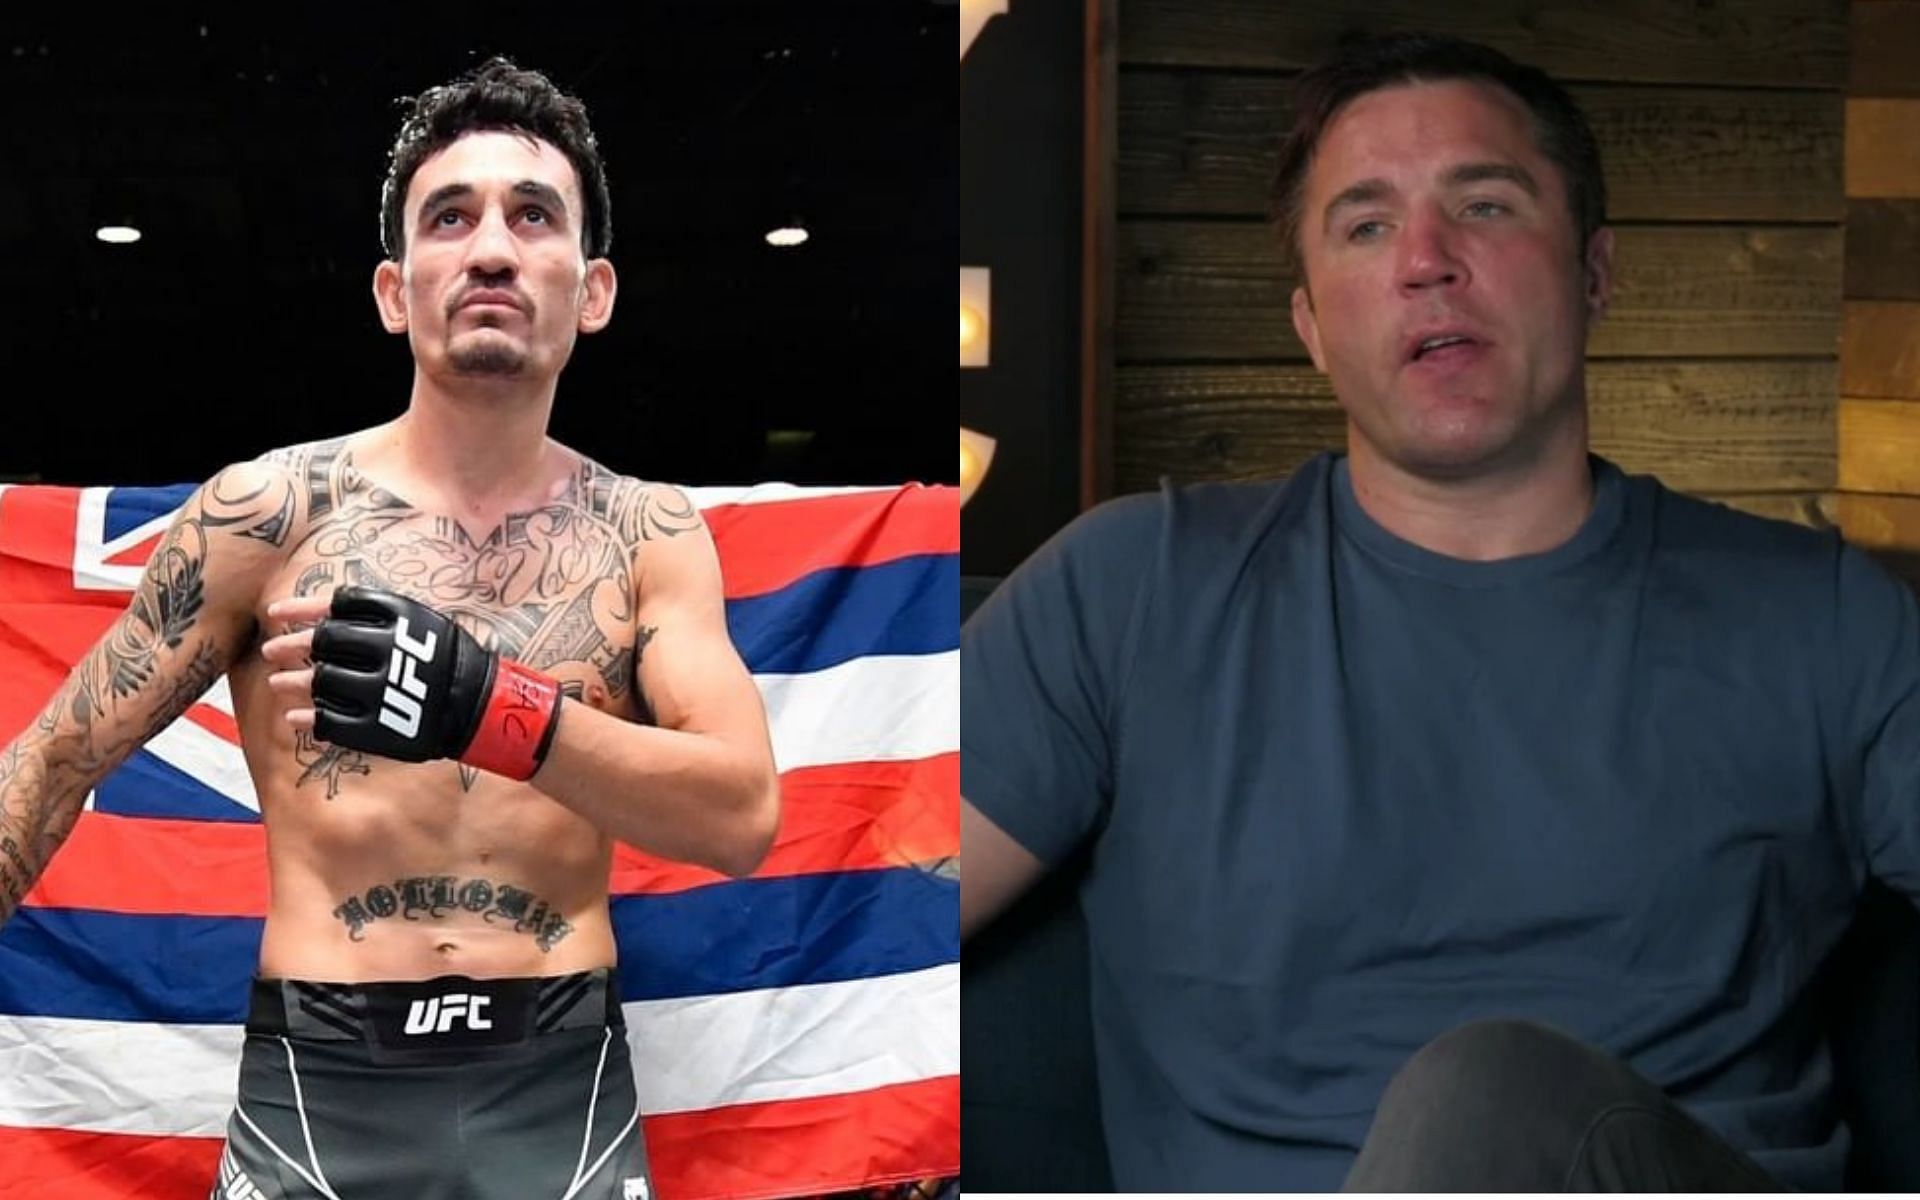 Max Holloway (left) and Chael Sonnen (right) [Photo credit: @ufc on IG and YouTiube.com]